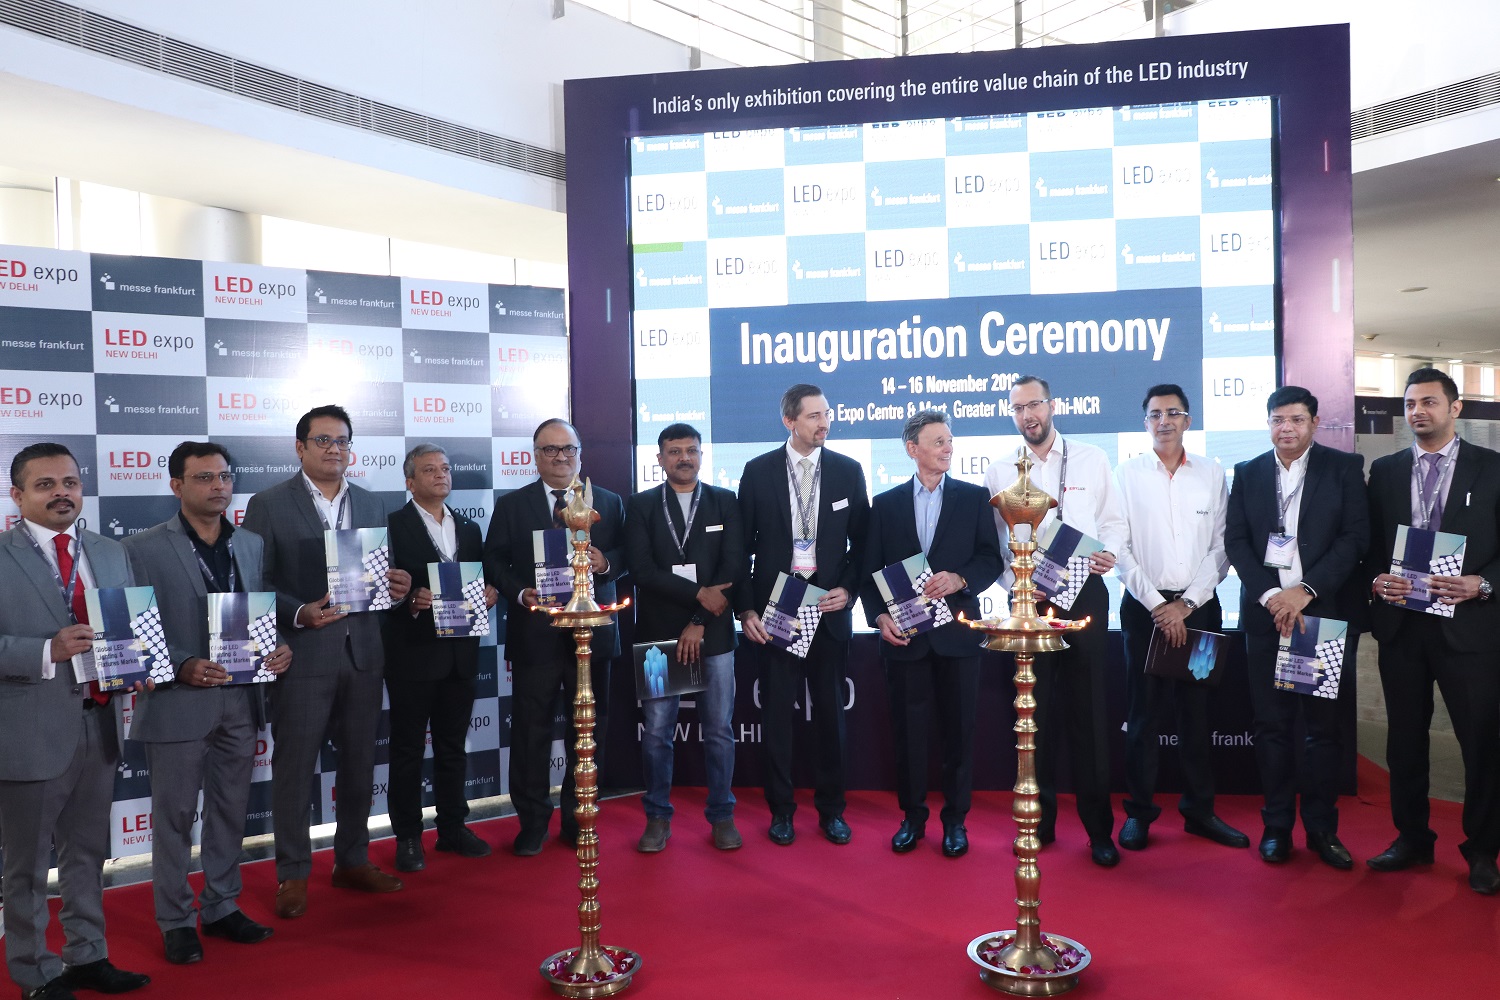 Record-breaking edition of LED Expo New Delhi inaugurated today